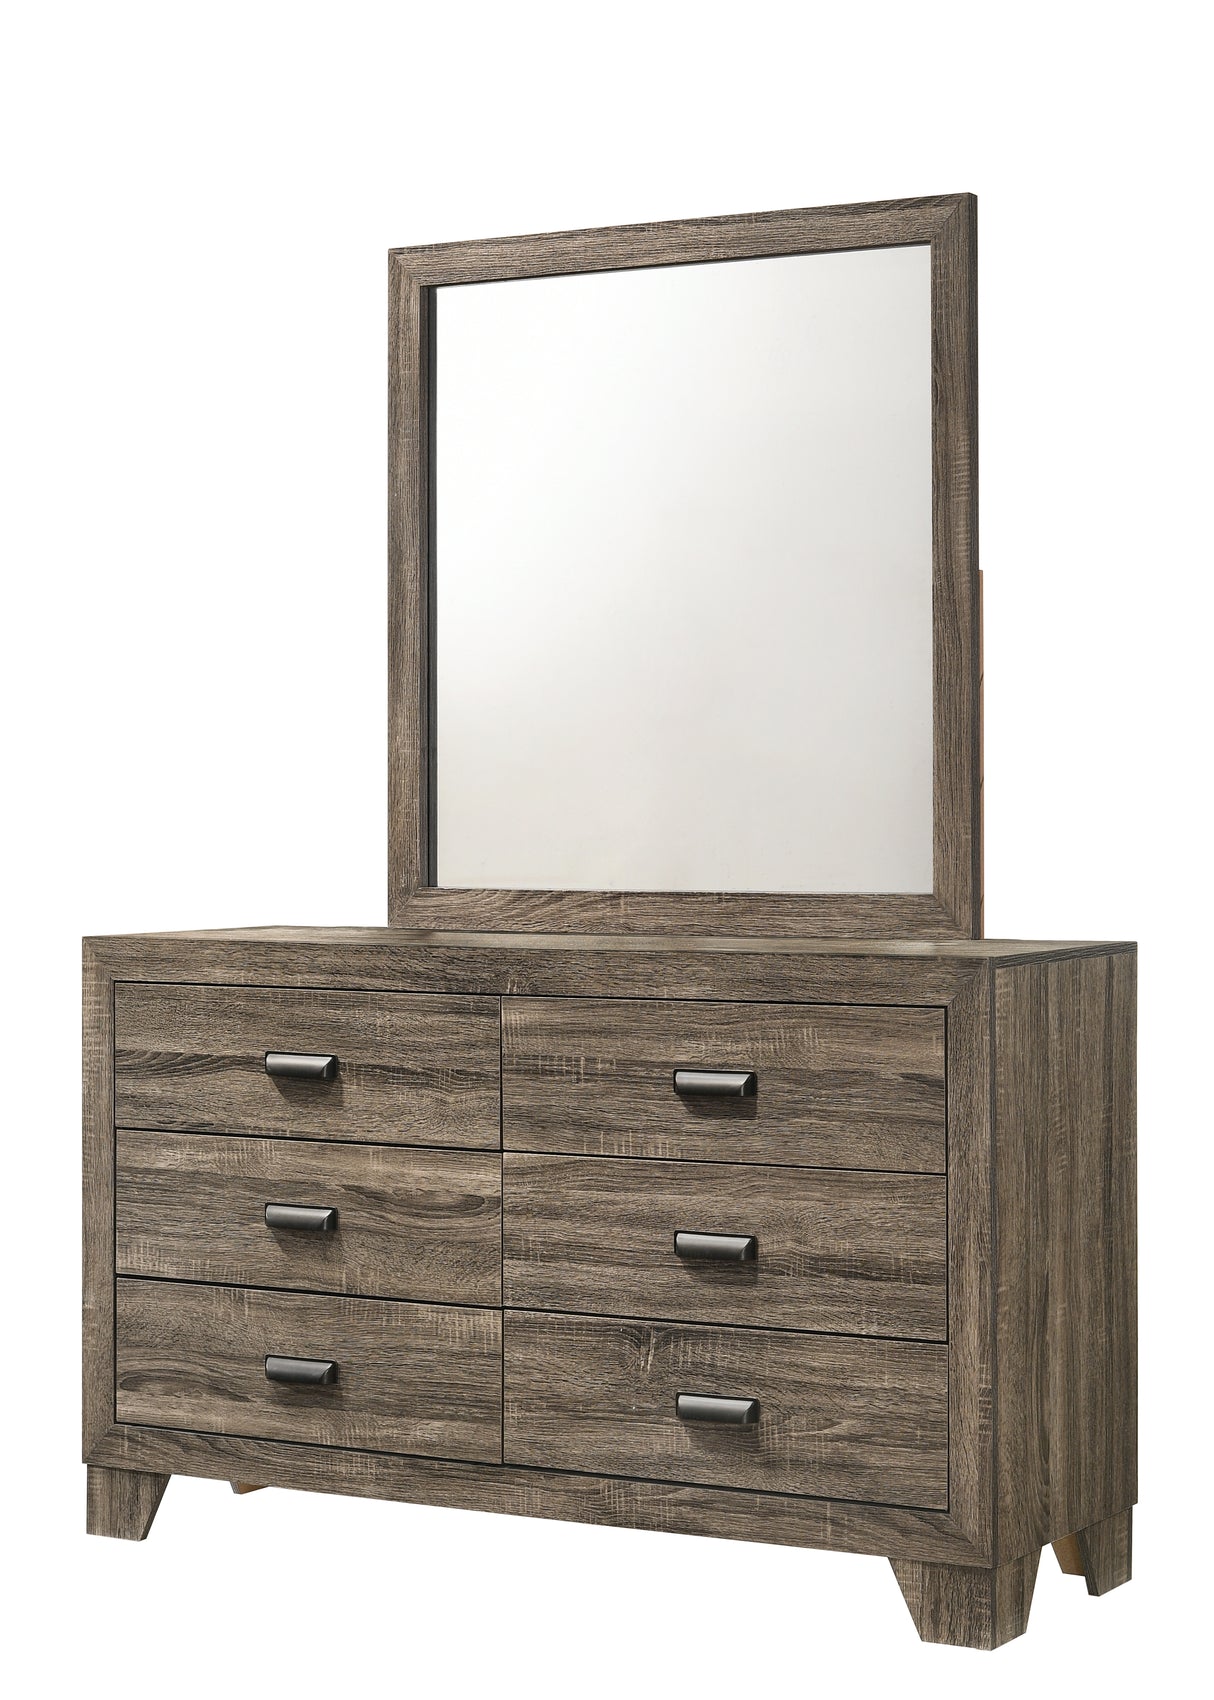 Mille Brownish Gray Upholstered Youth Bedroom Set